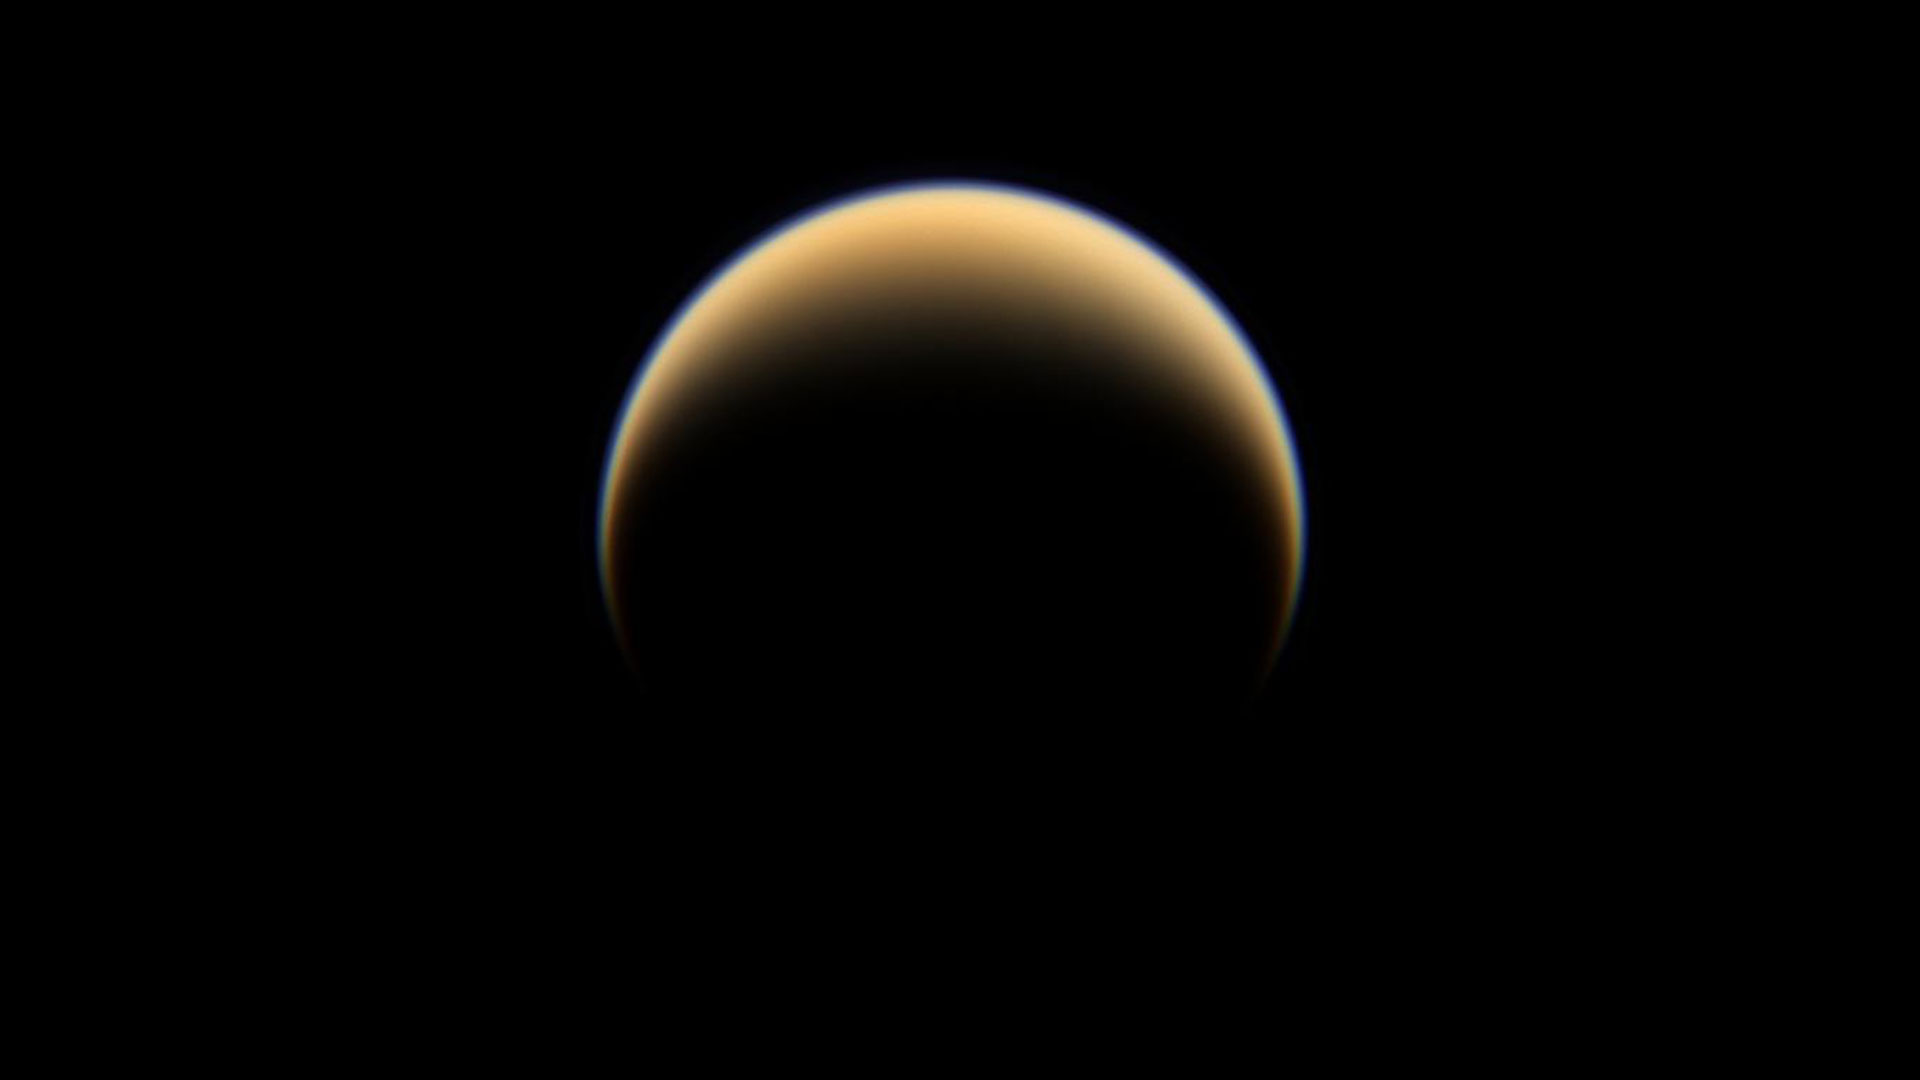 Hazy, yellowish Titan against the darkness of space